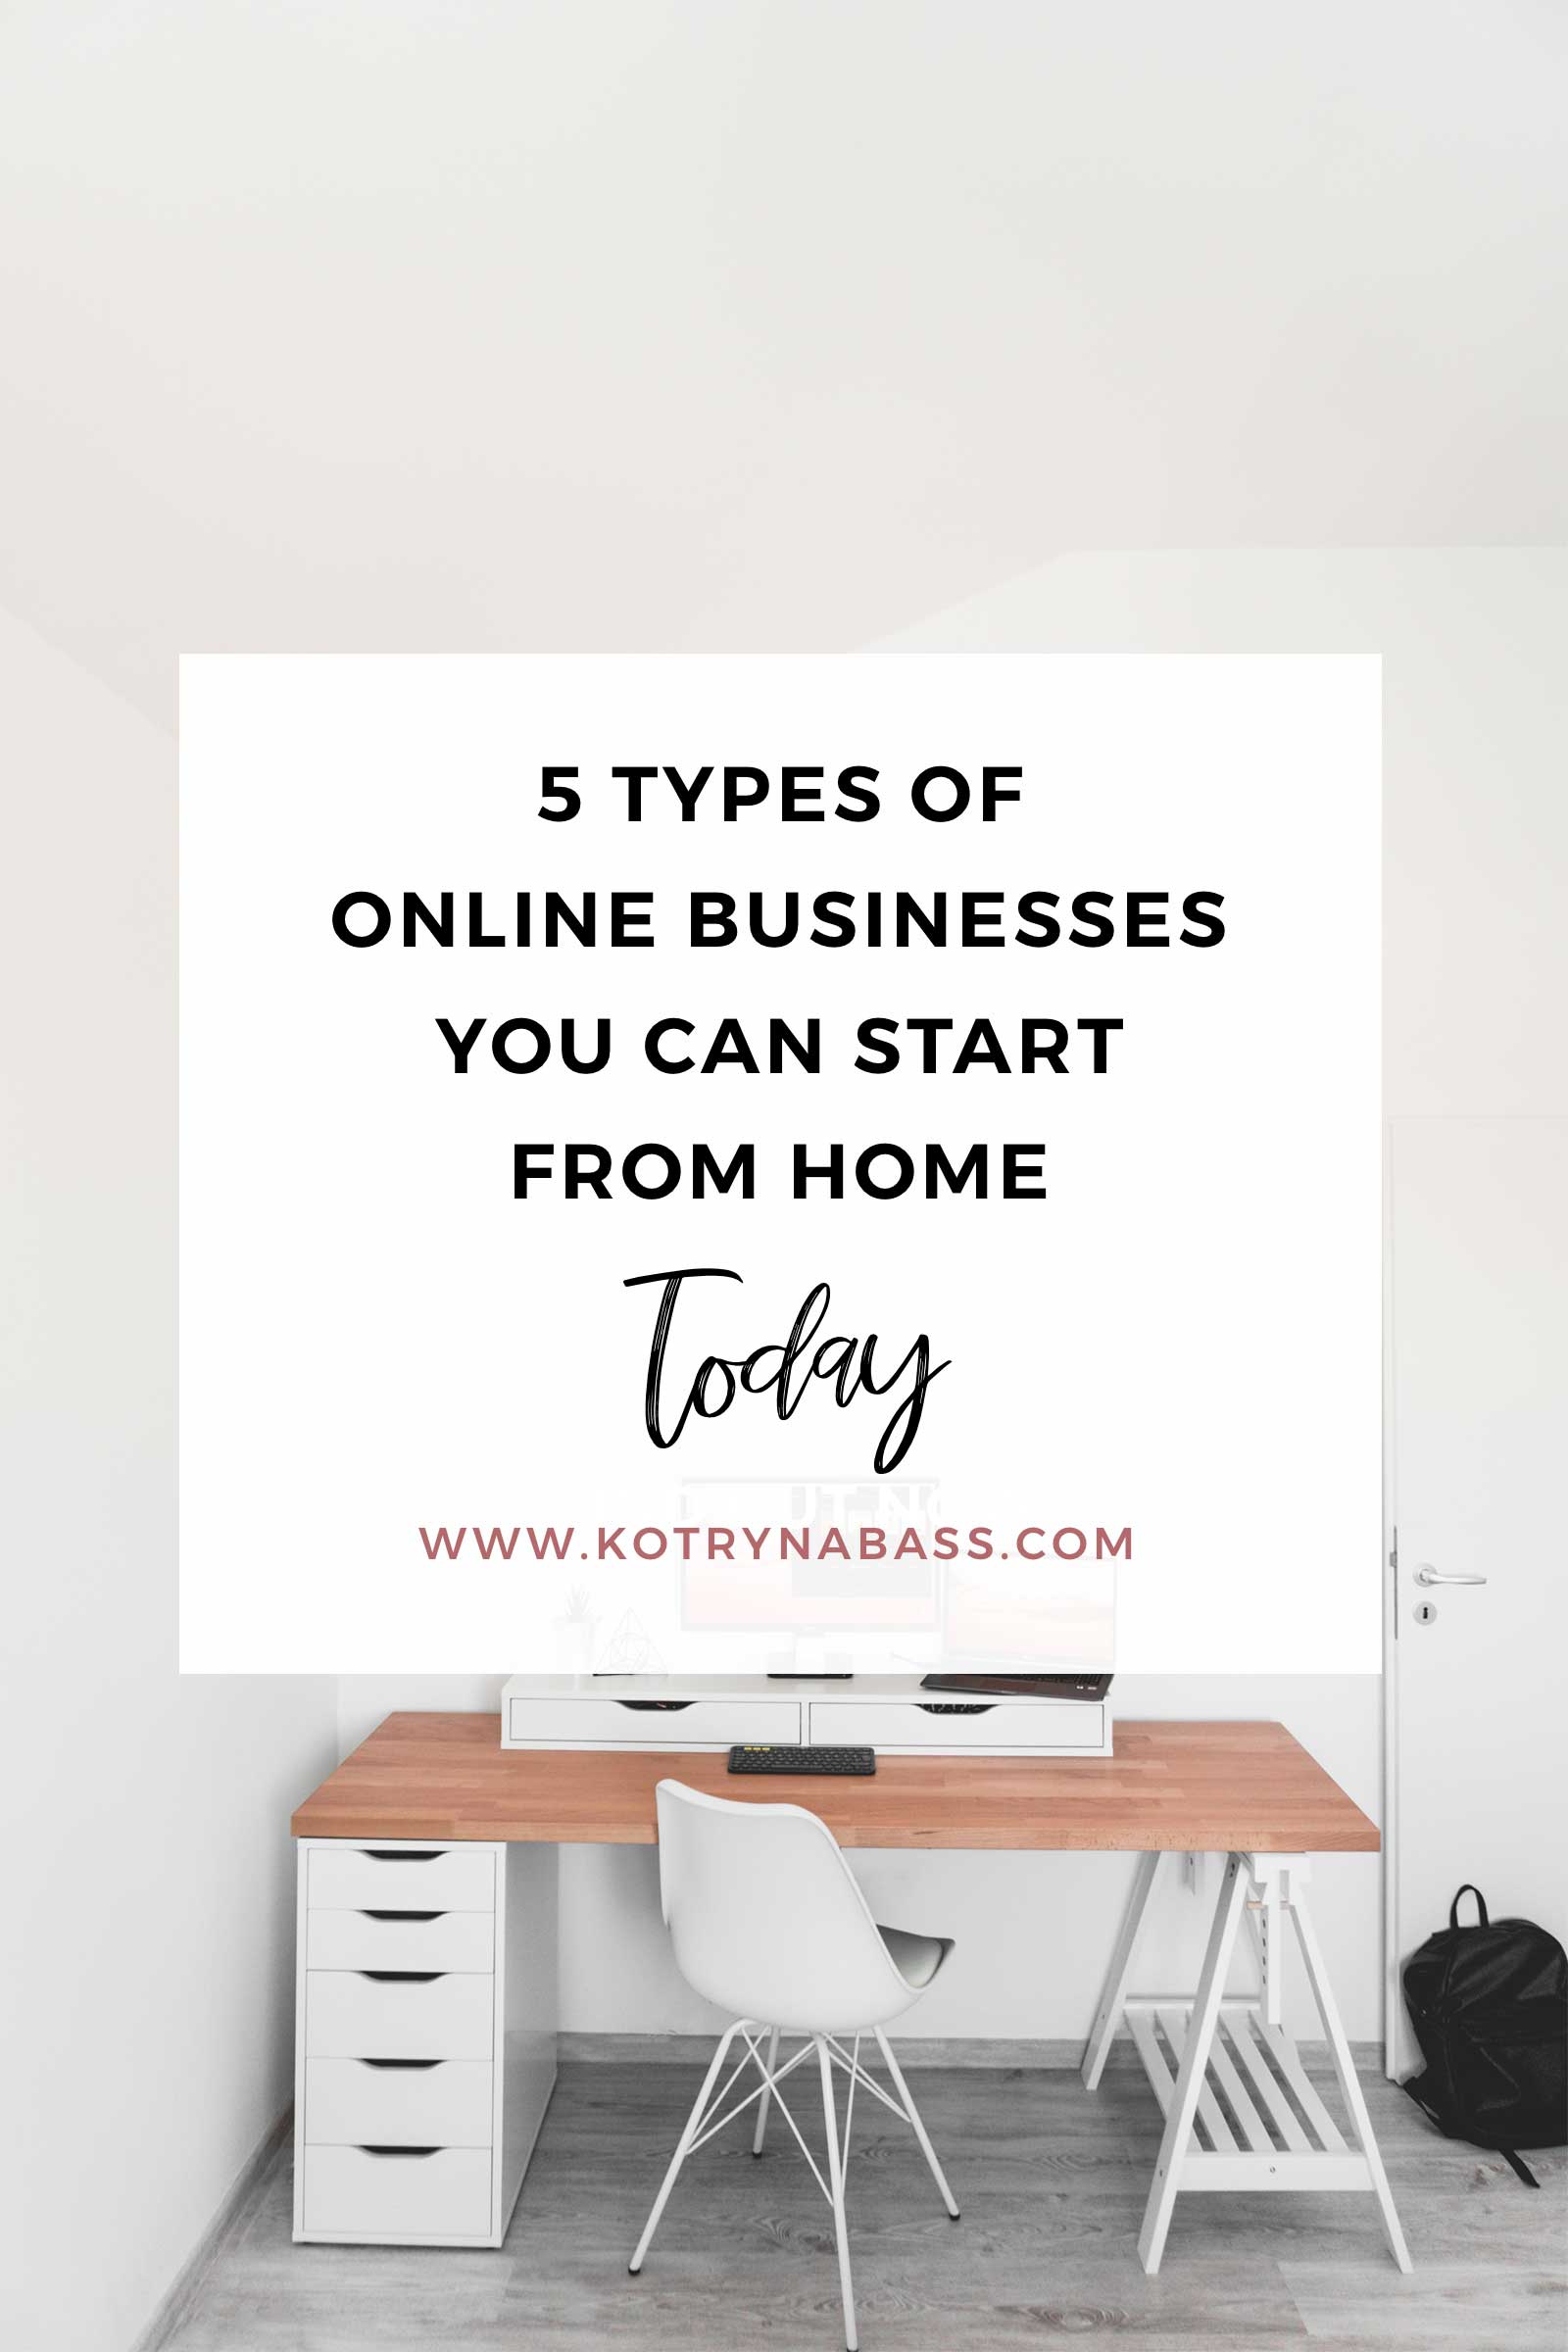 Are you a stay at home mom in need of some extra $$$ to support your family? Or are you a student looking for flexible working hours in order to put yourself through college? Or perhaps you just feel so fed up with your 9-5 job? Whatever the circumstances- starting an online business from home can be a great opportunity for you & I'm here today to share some ideas with you all!